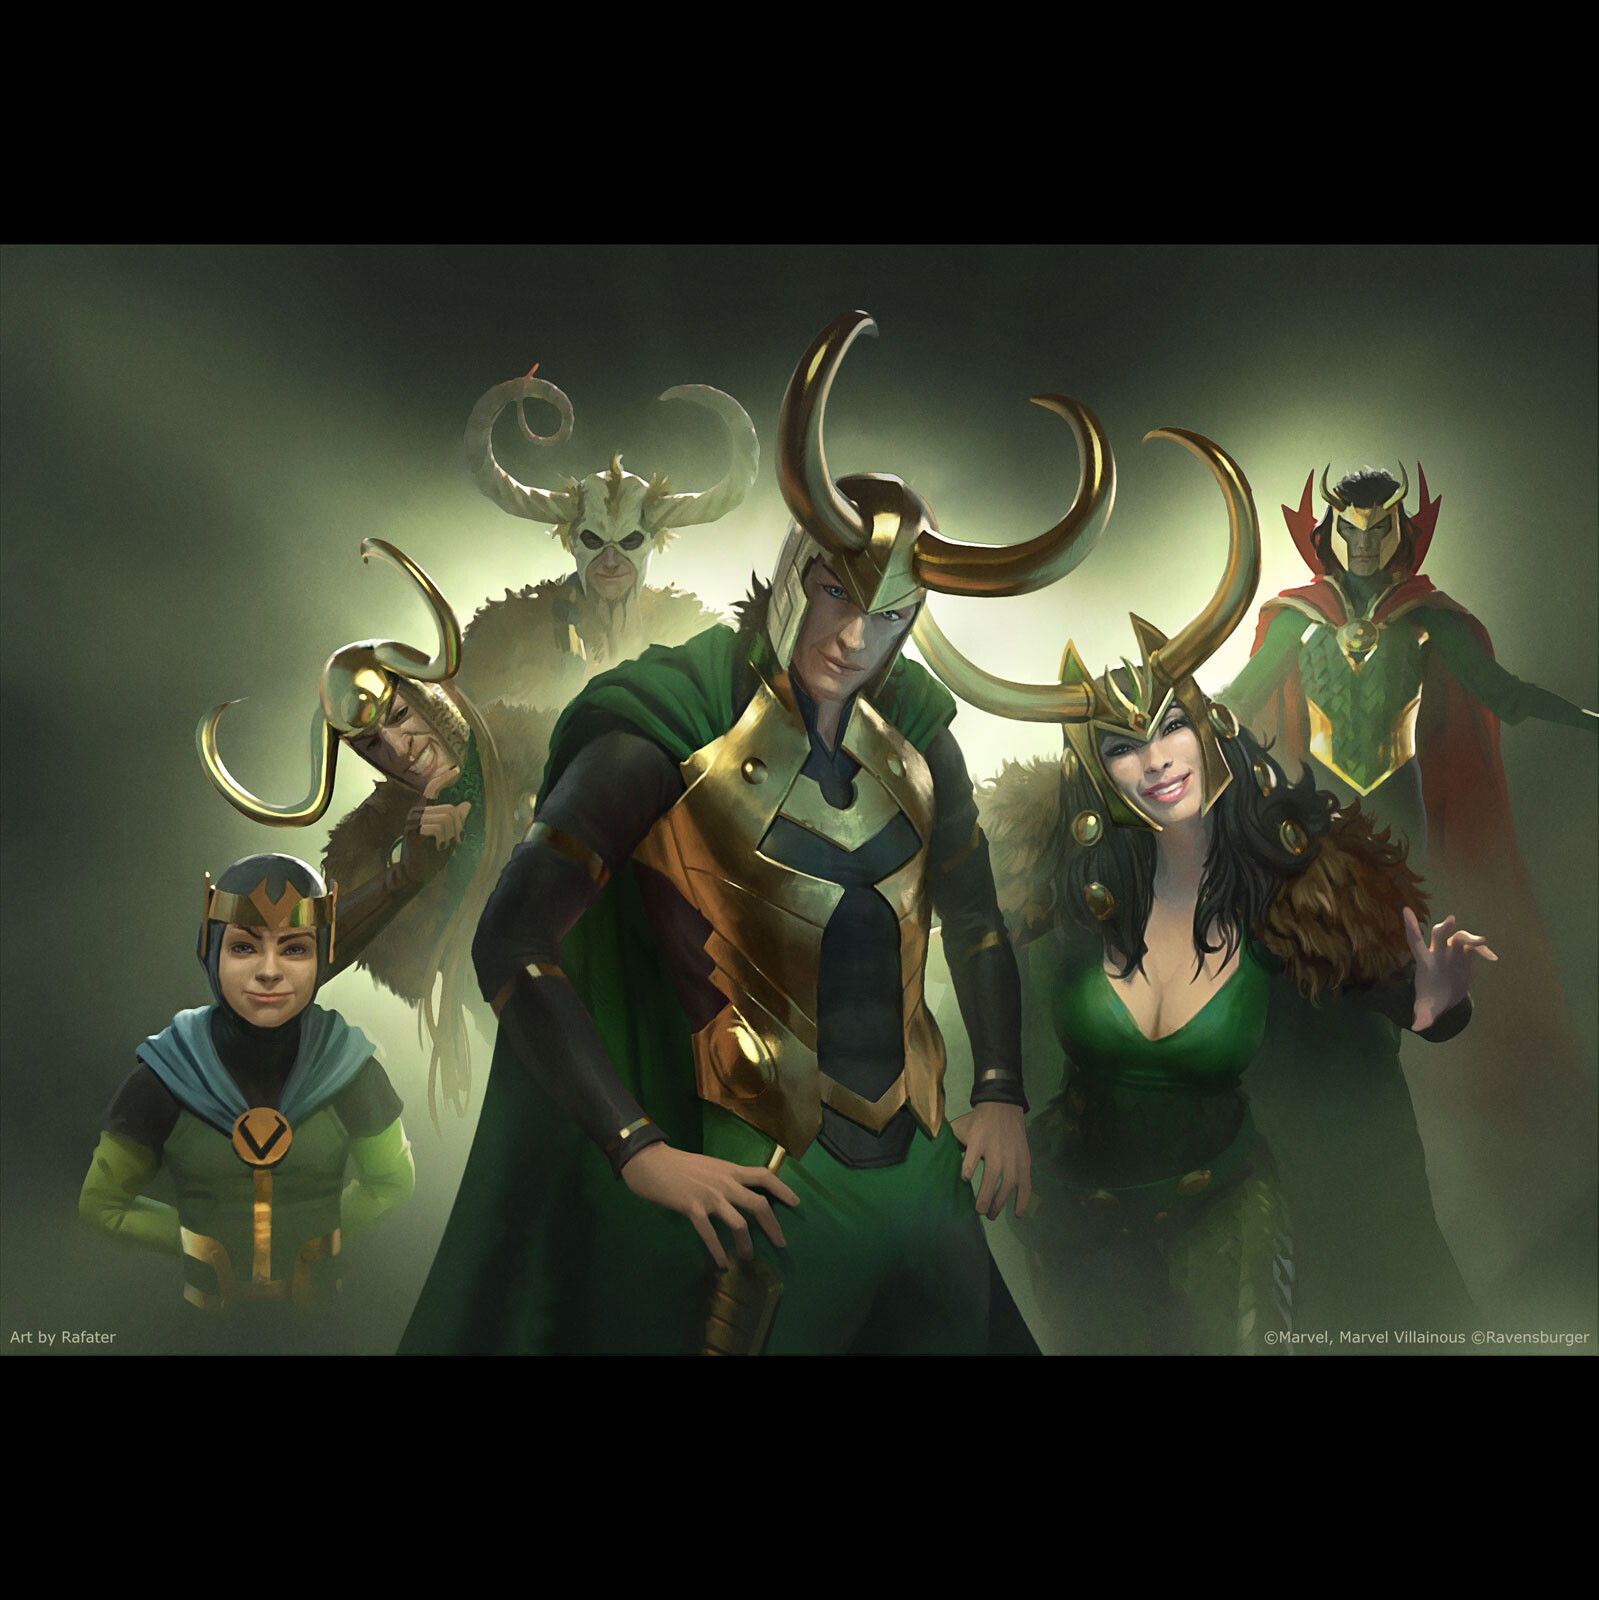 Marvel Villainous - Mischief and Malice - Loki - I did what when